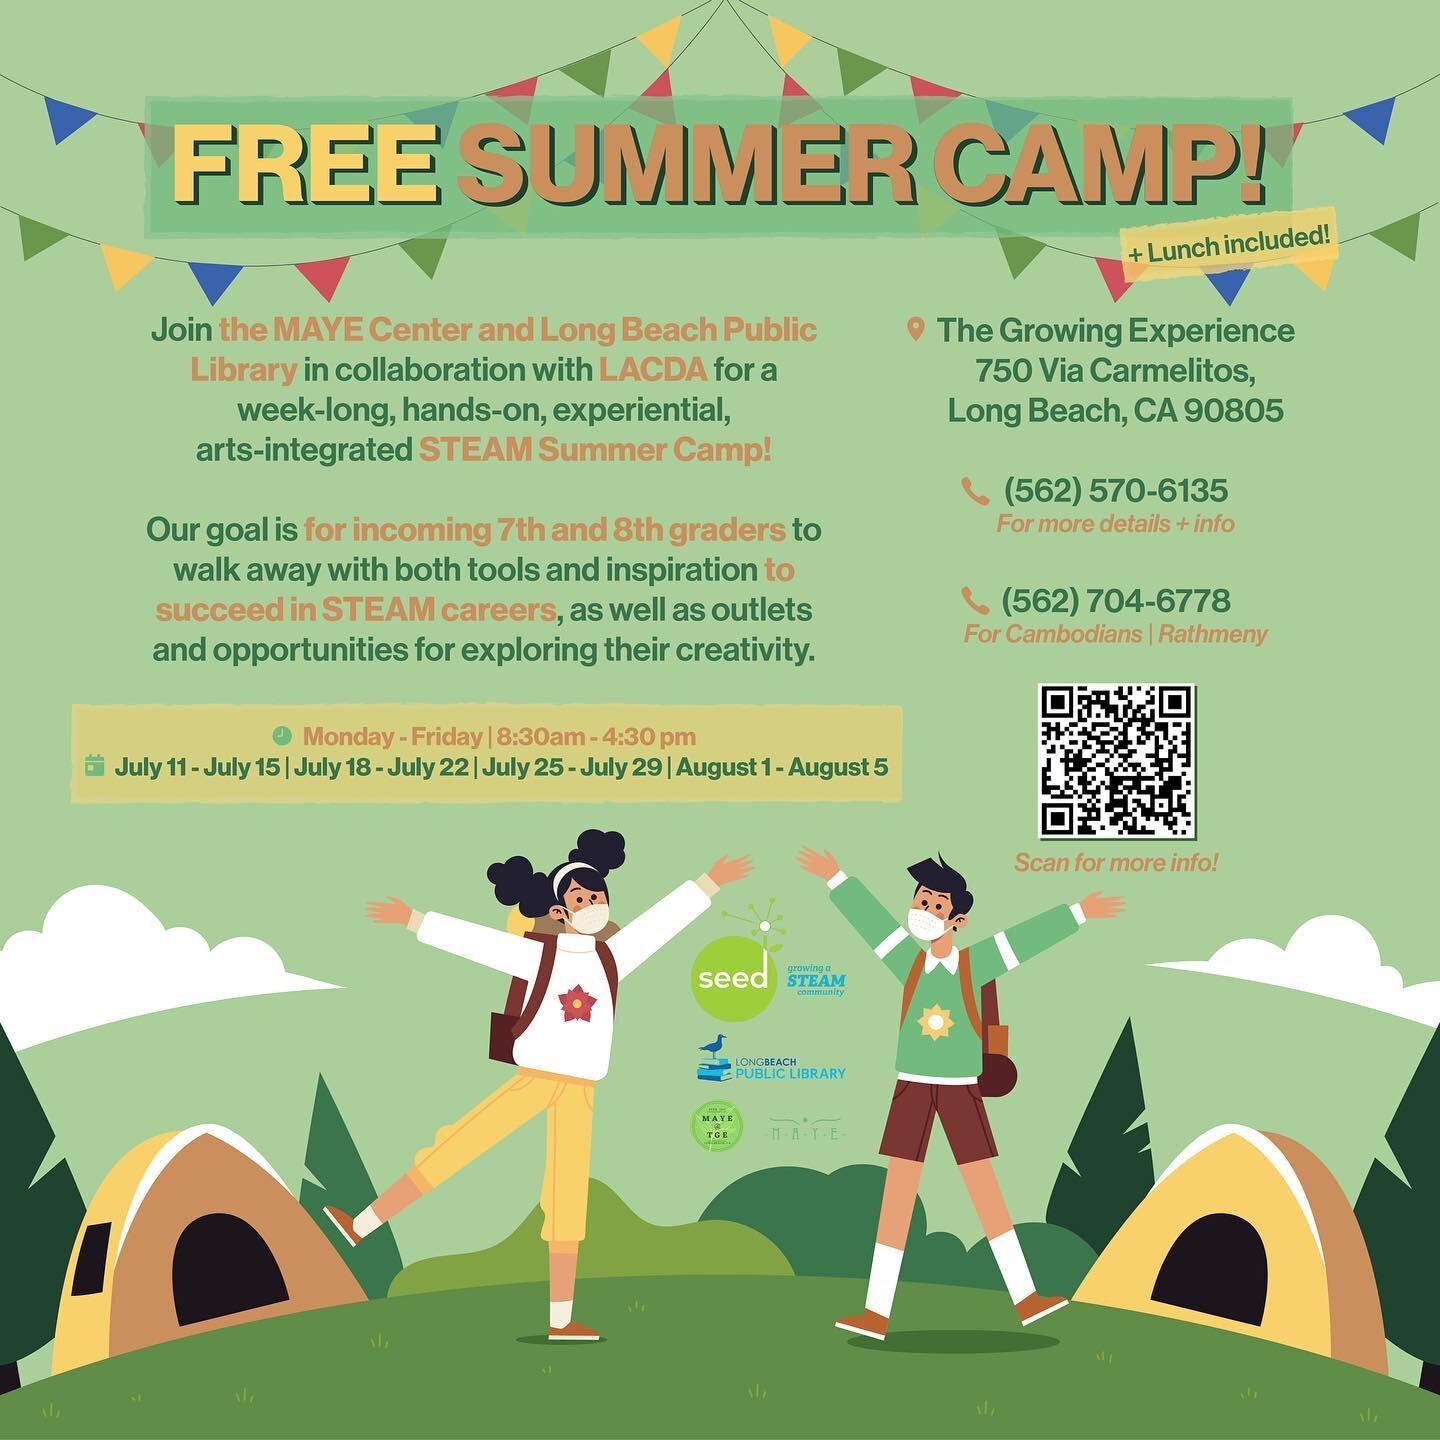 🎨 Join the MAYE Center and Long Beach Public library in collaboration with LACDA at the Growing Experience Urban Farm for a FREE hands-on, experiential, arts-integrated STEAM Summer Camp!

🌈 This is a perfect opportunity for incoming 7th and 8th gr